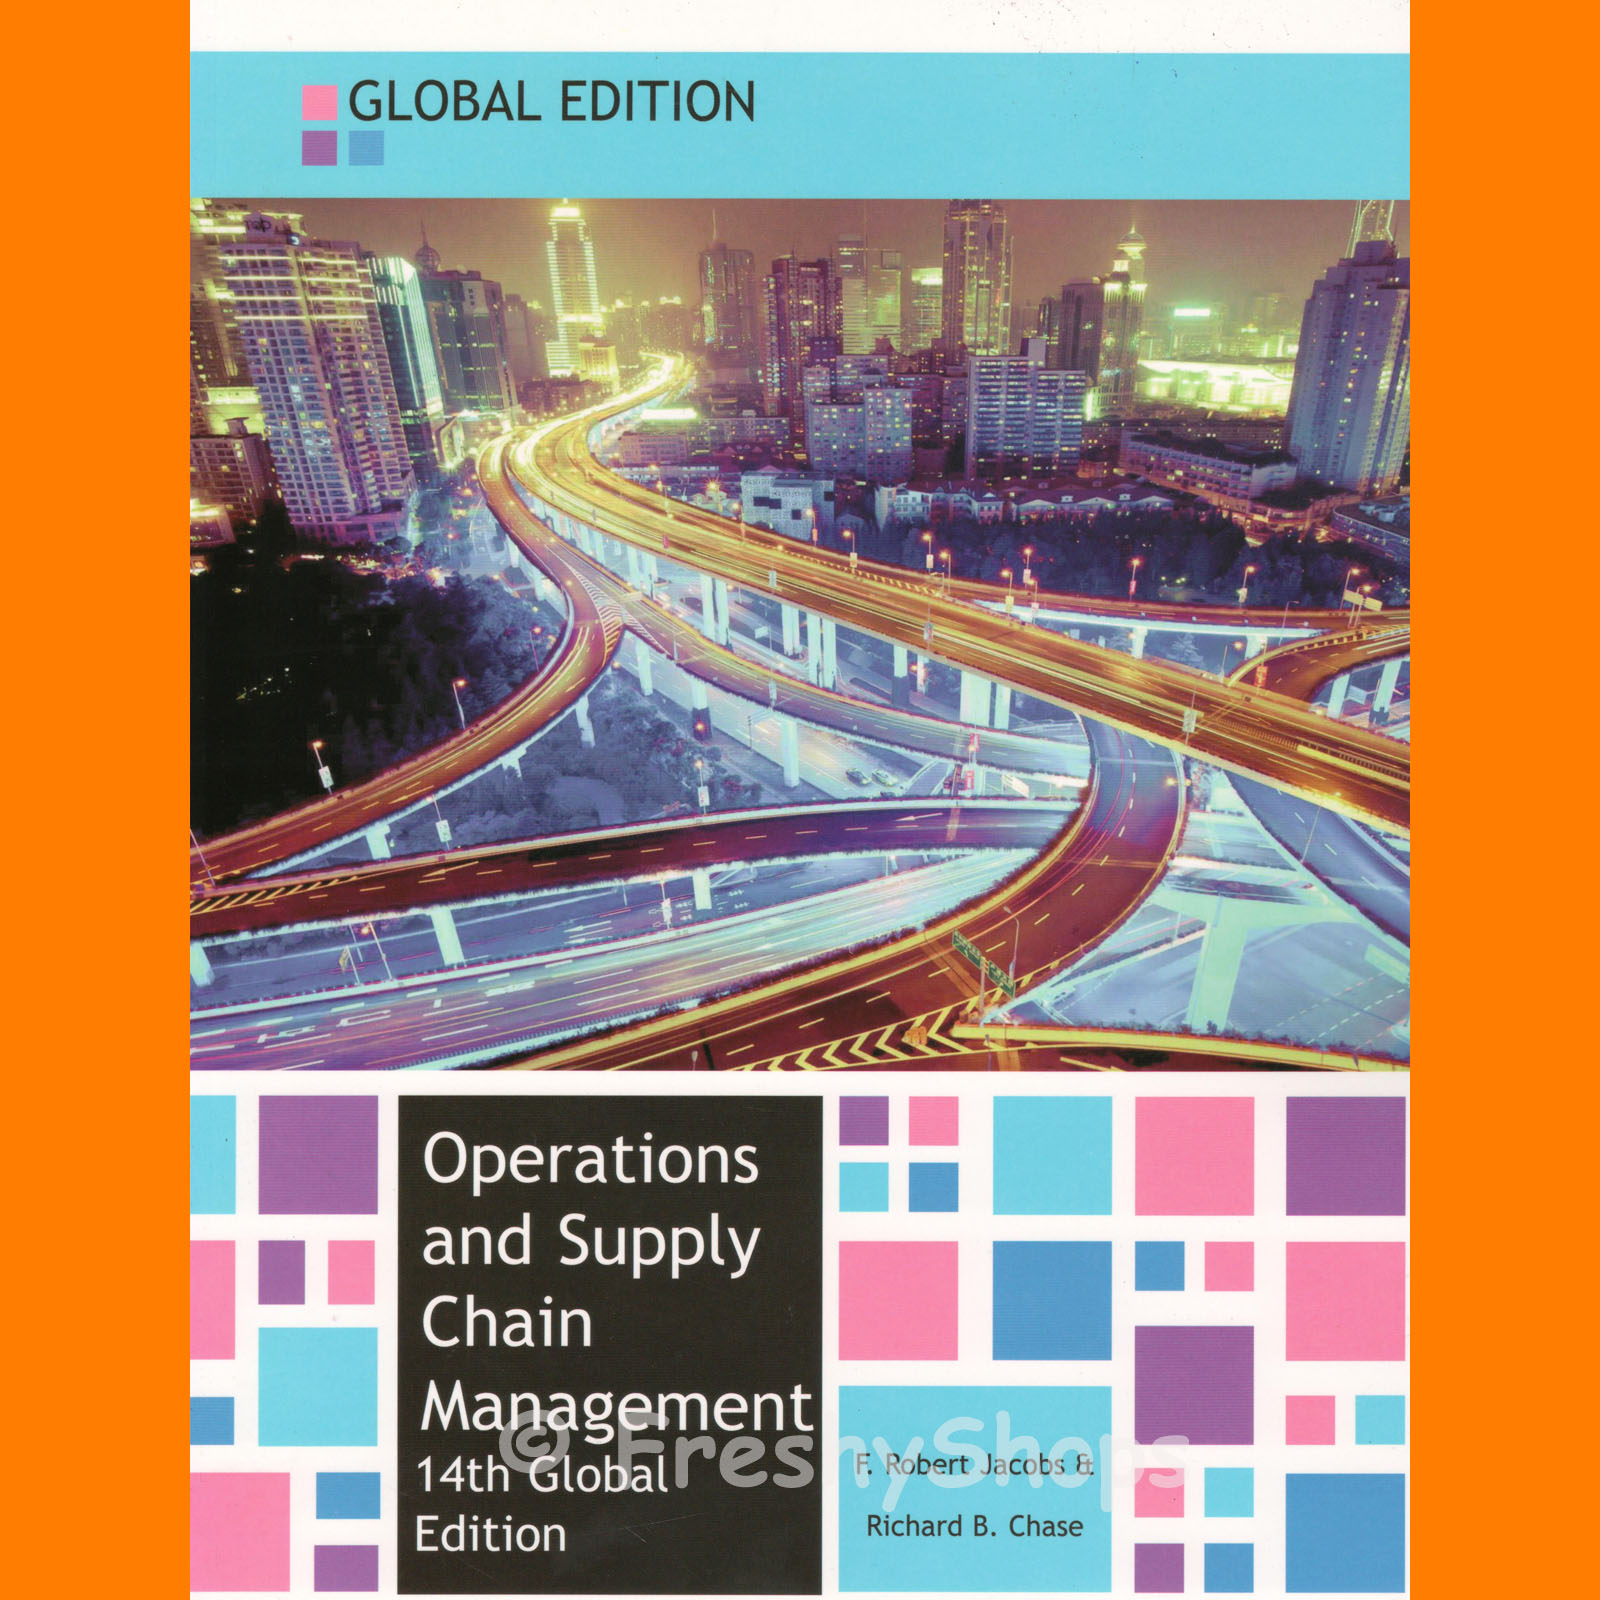 NEW! OPERATIONS & SUPPLY CHAIN MANAGEMENT 14TH EDITION, F ROBERT JACOBS